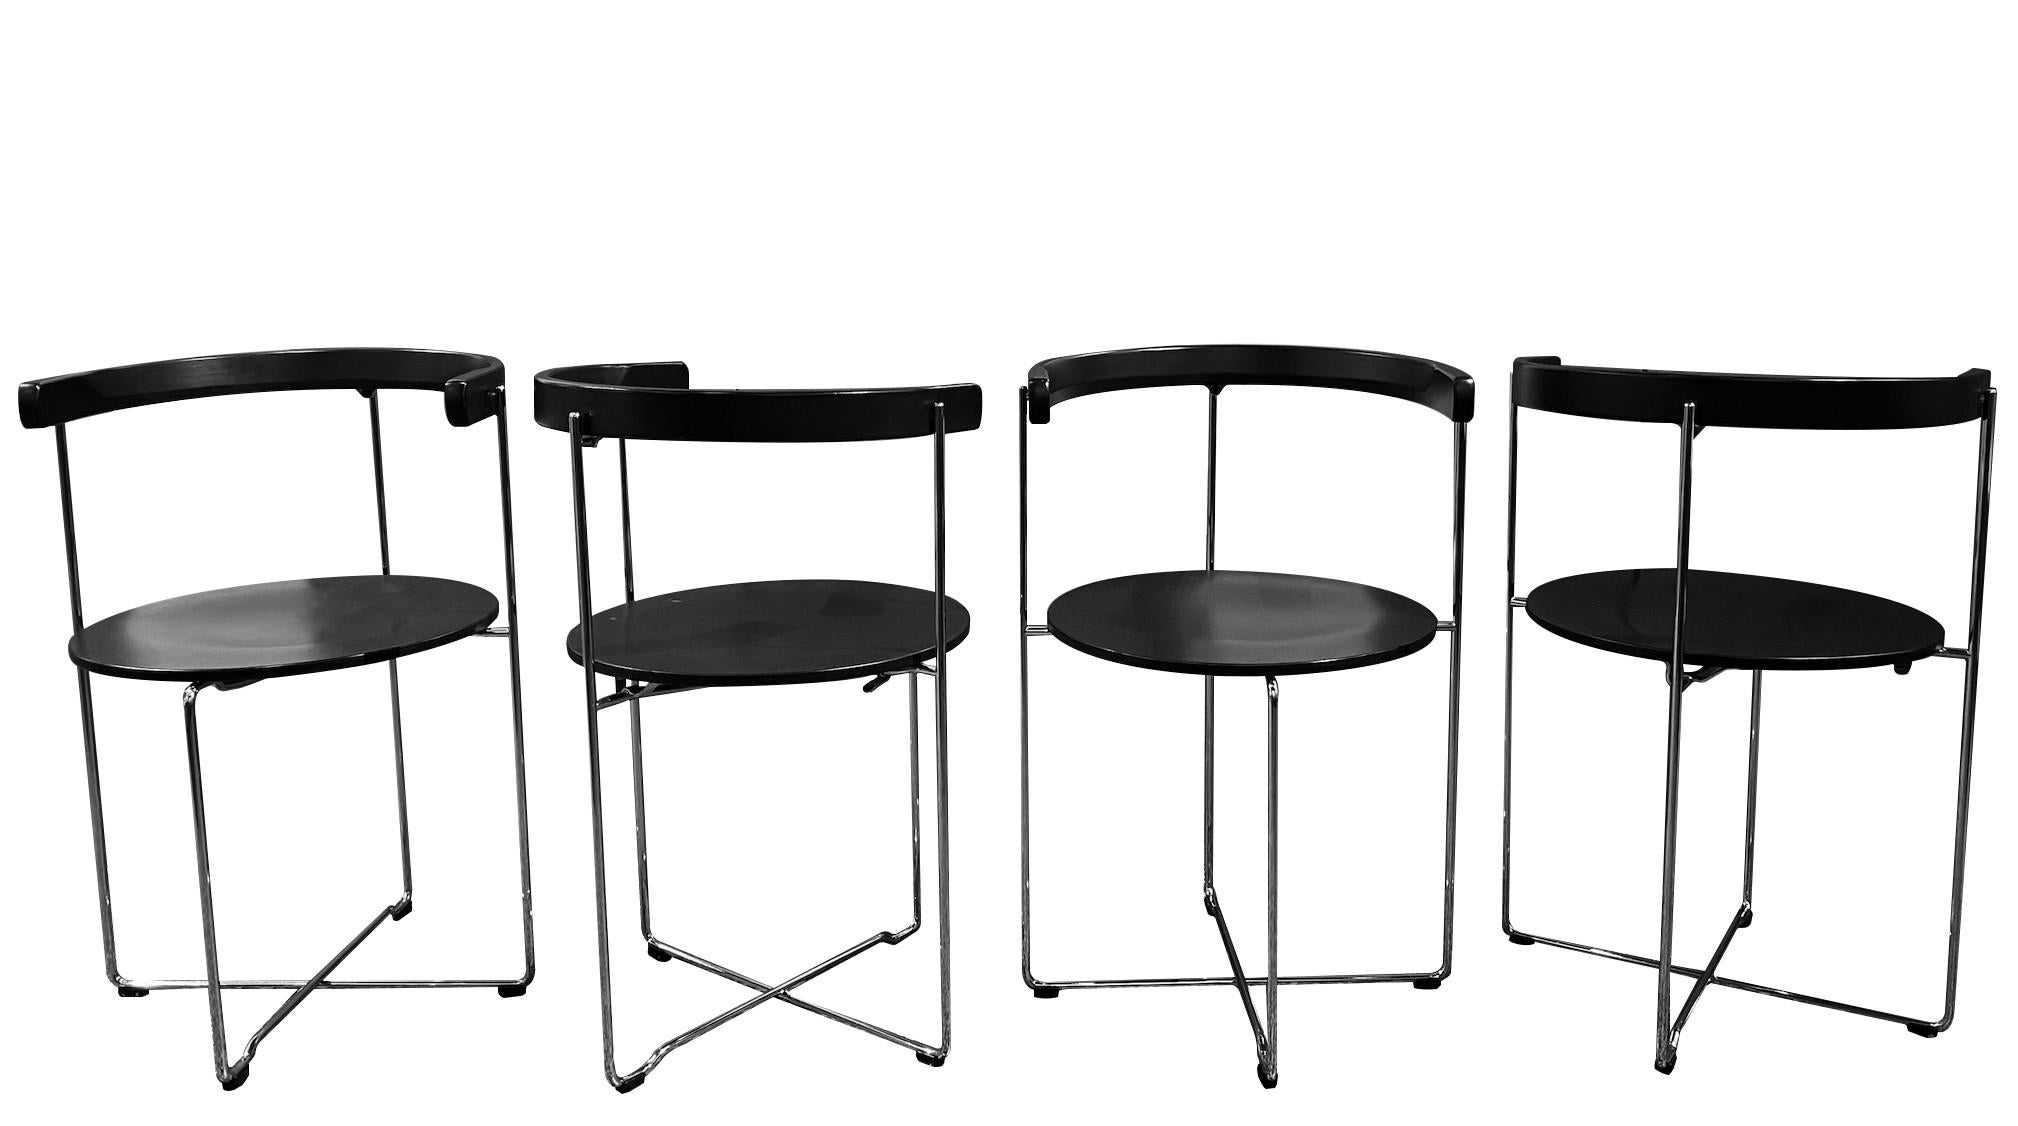 Set of four black stained wood and tubular steel iconic folding chairs designed in 1981 by Valdimar Hardarson for the Kusch and Co.

At the time it was named 